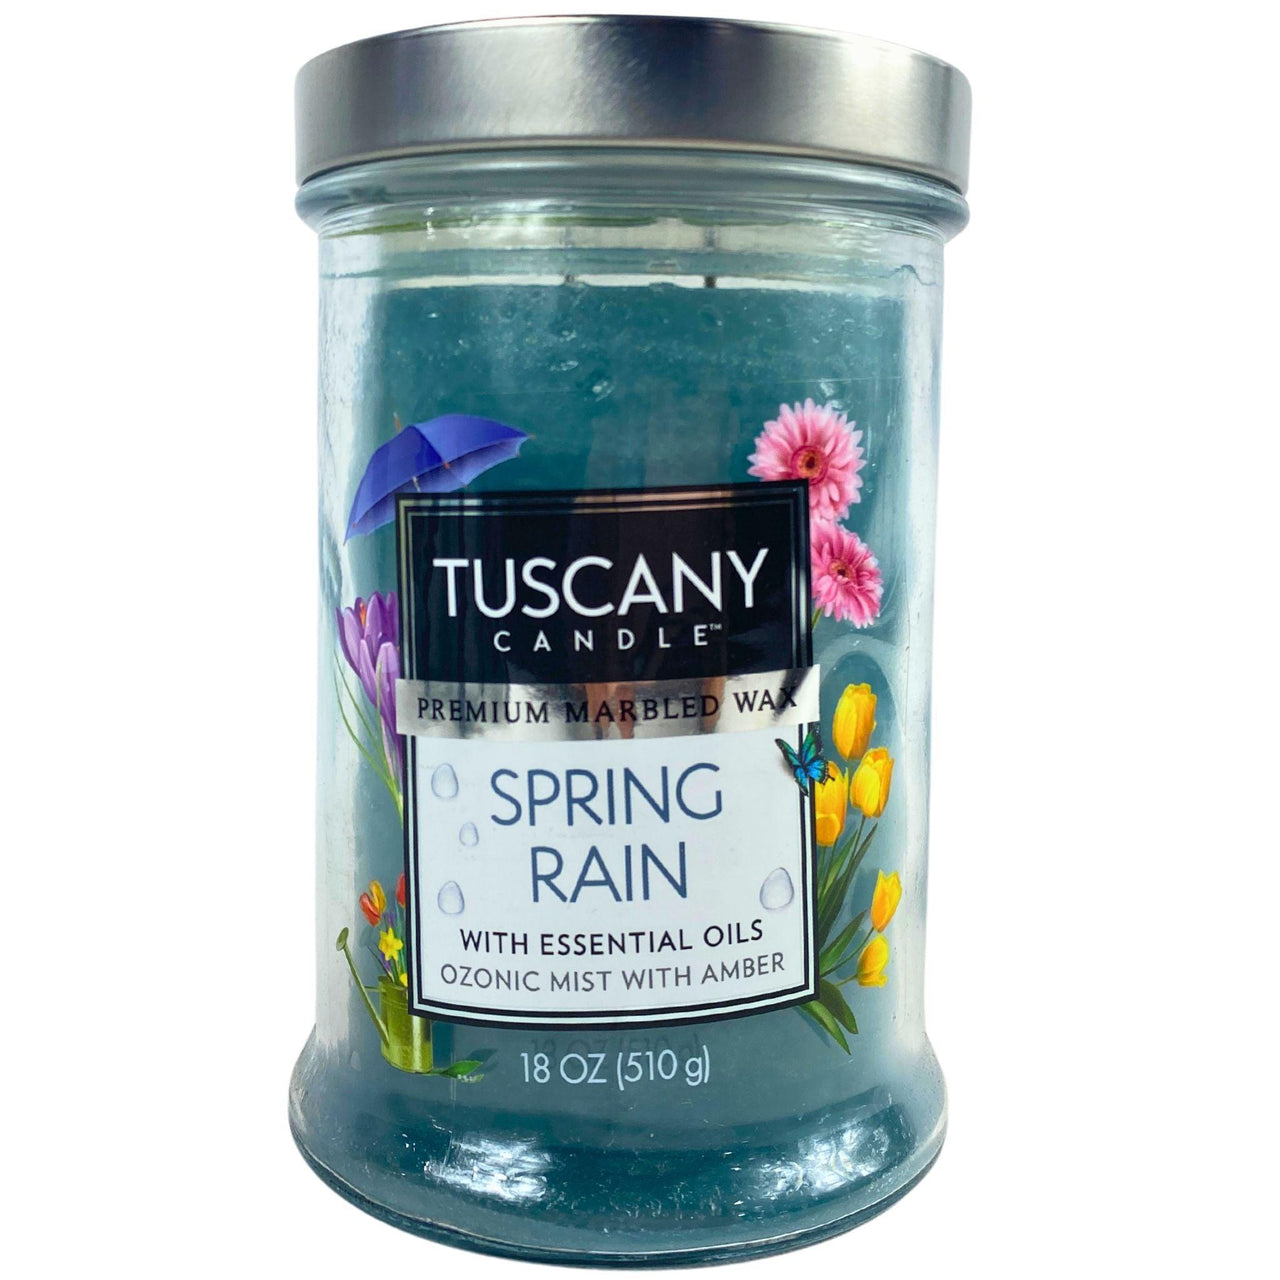 Tuscany Candle Premium Marbled Wax Spring Rain with Essential Oils Ozonic Mist with Amber 18OZ (24 Pcs Lot) - Discount Wholesalers Inc